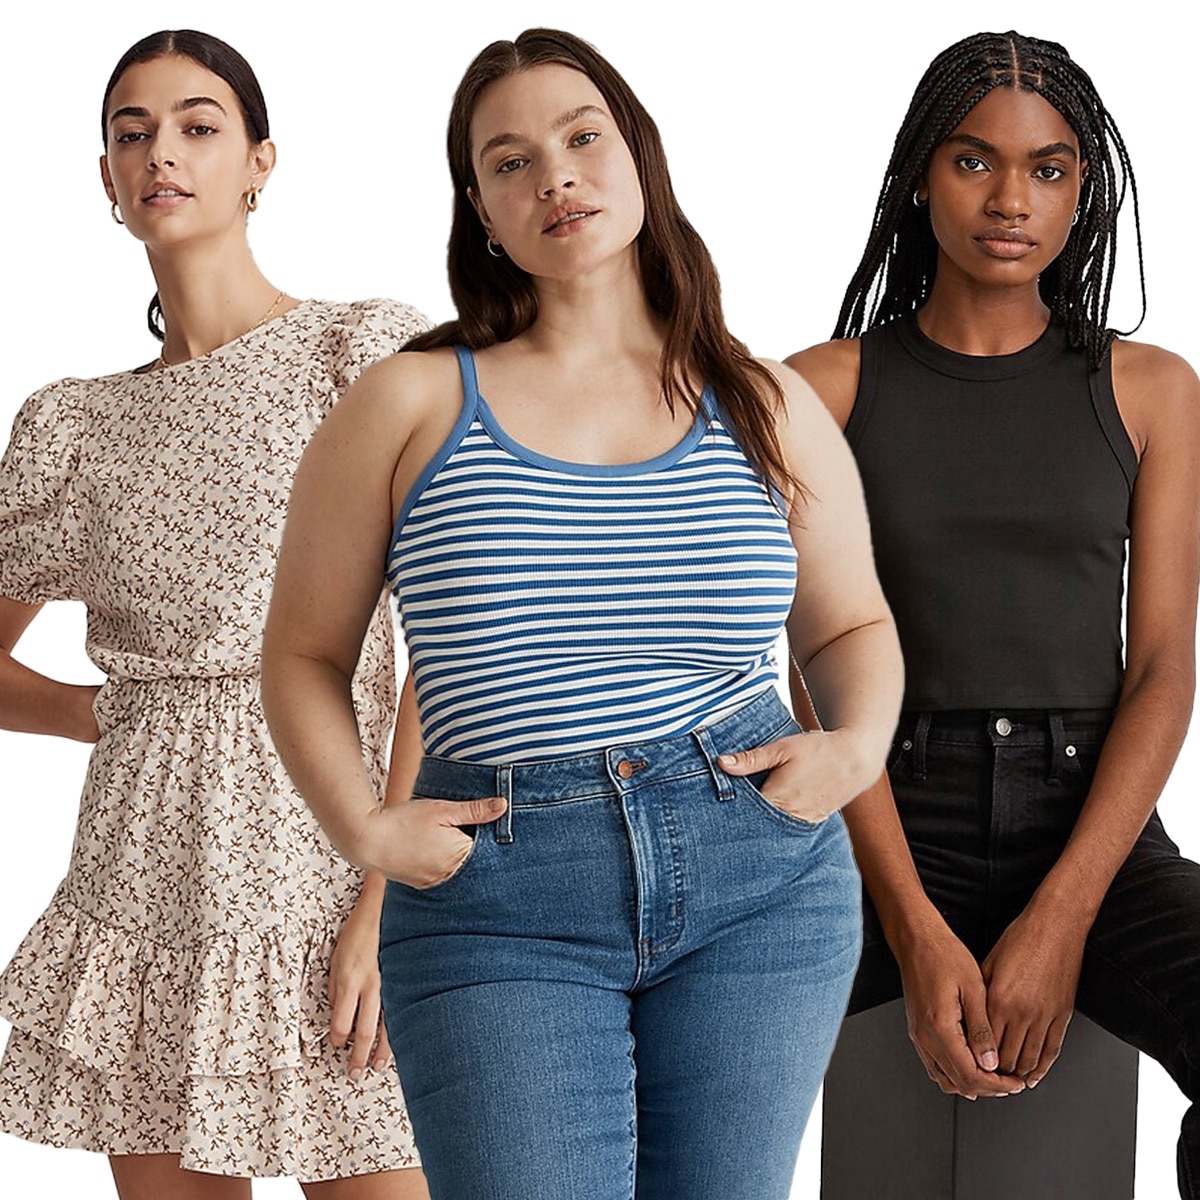 Madewell's Extra 30% Off Sale Has Trendy Spring Styles Starting at $12